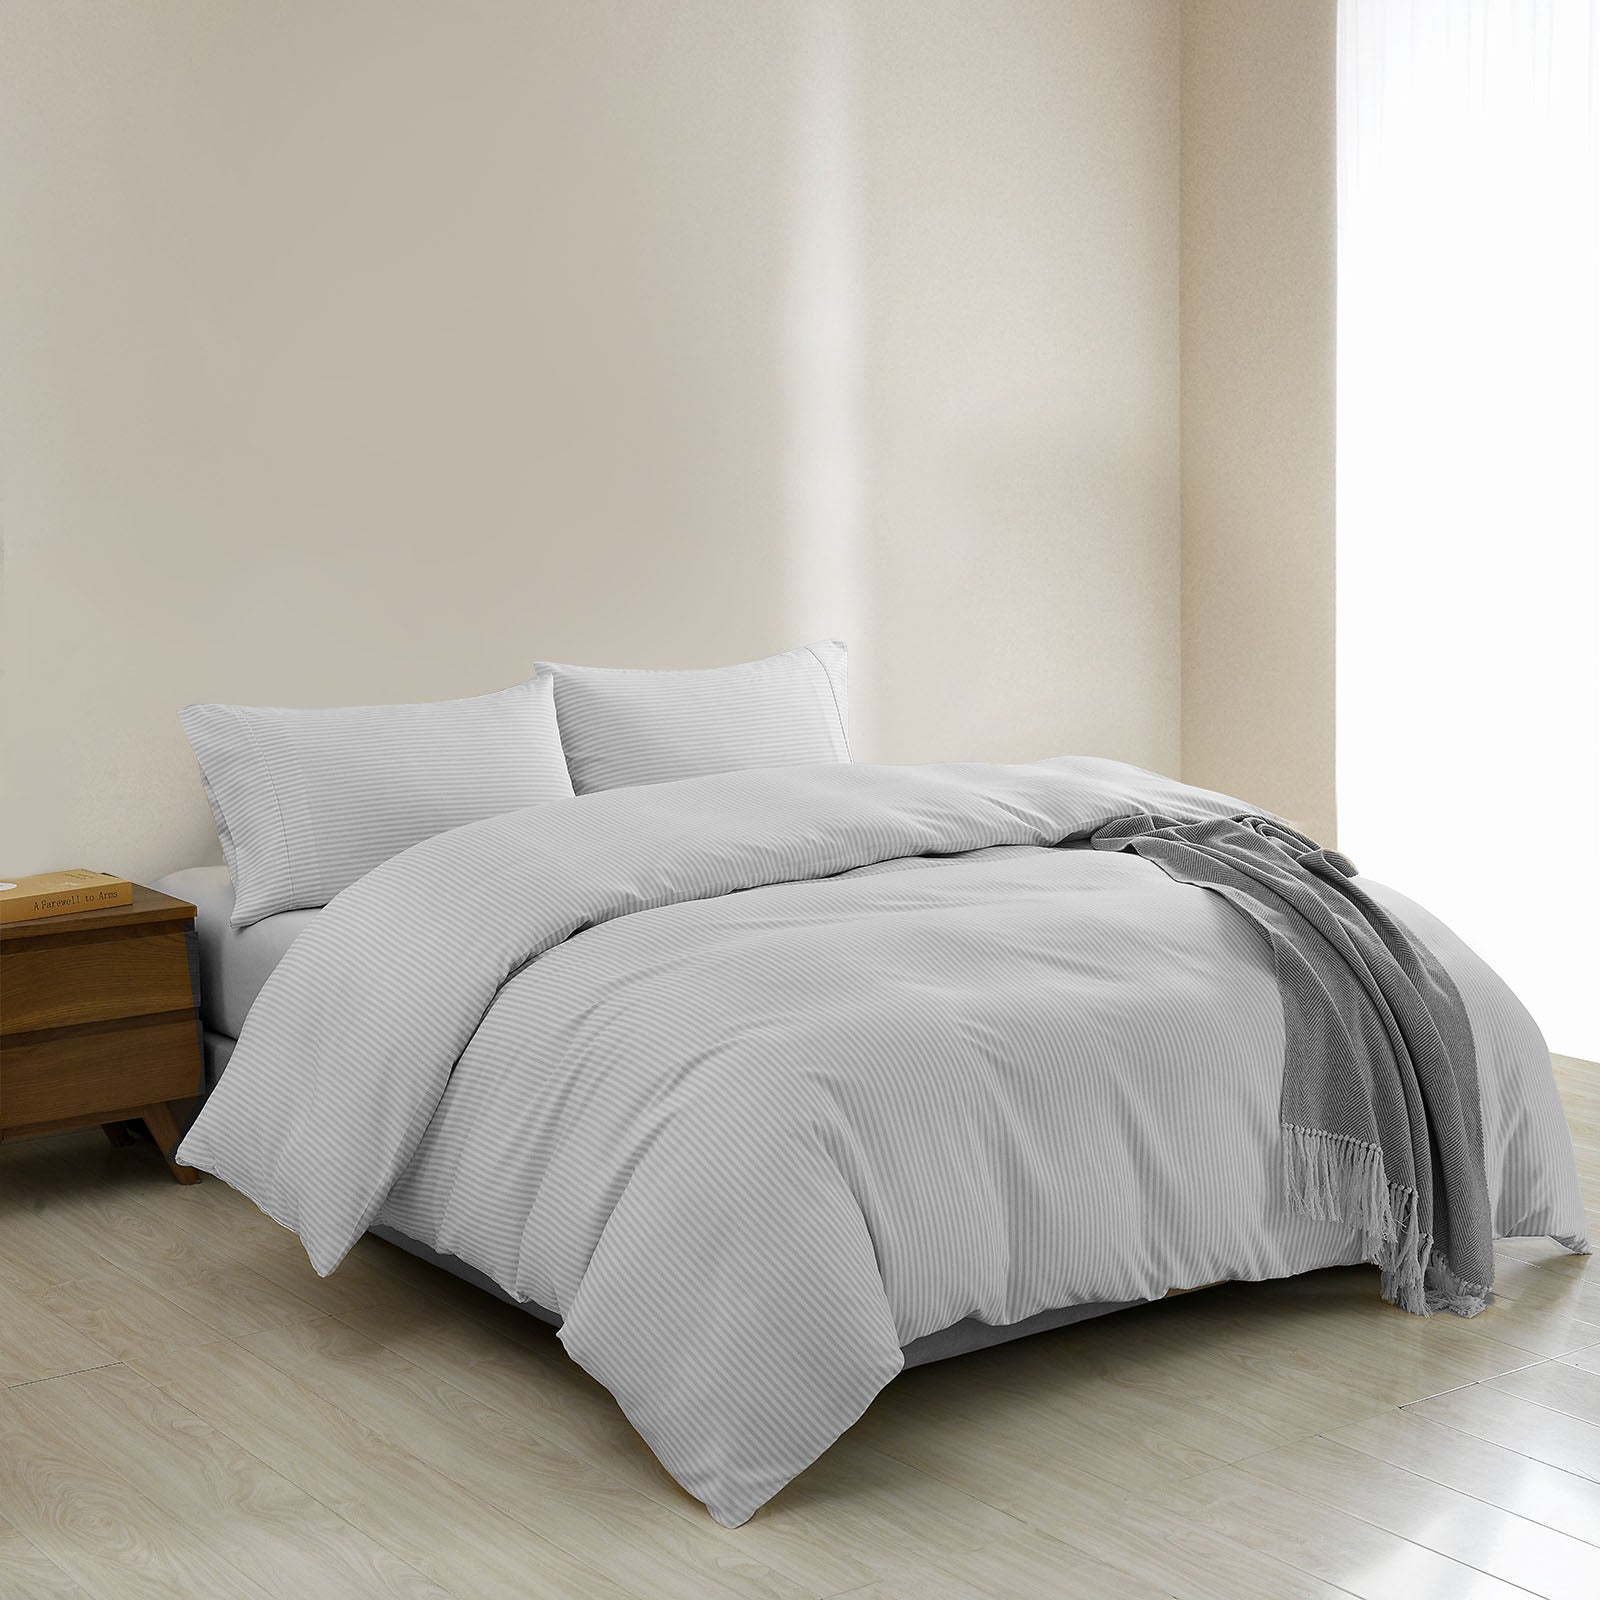 Royal Comfort Striped Flax Linen Blend Quilt Cover Set Soft Touch Bedding - Queen - Grey from Deals499 at Deals499